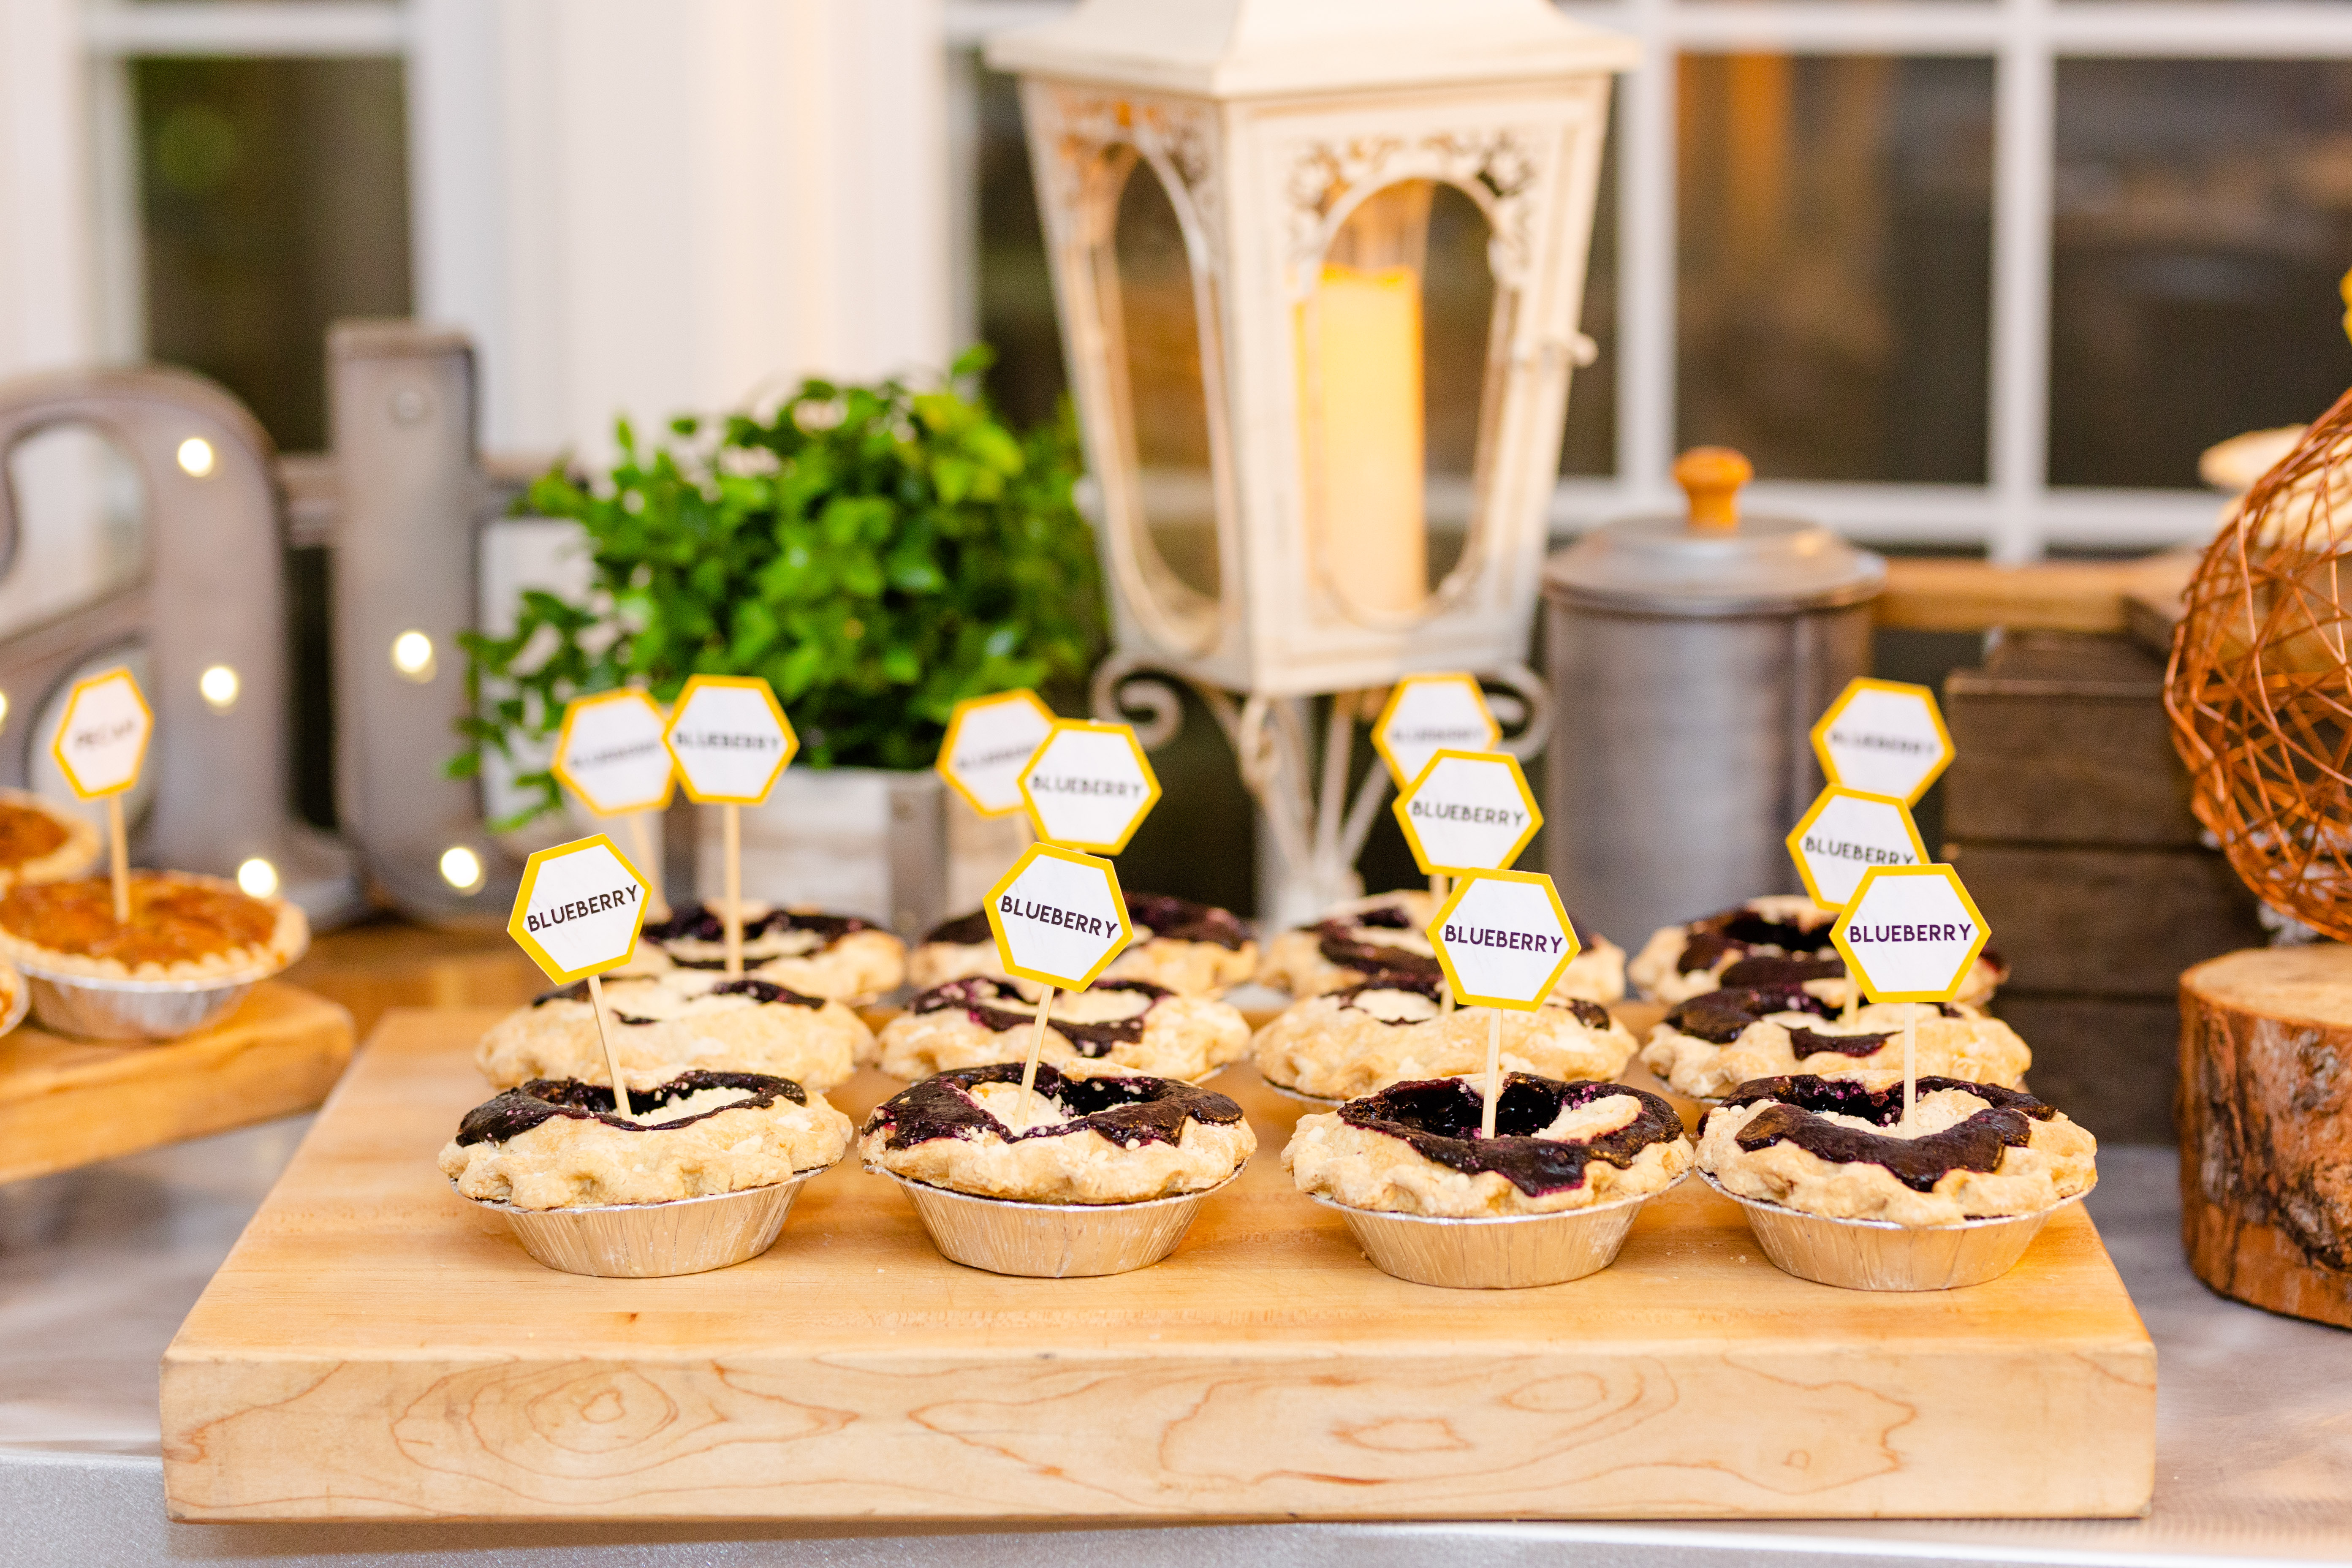 mini blueberry pies for guests